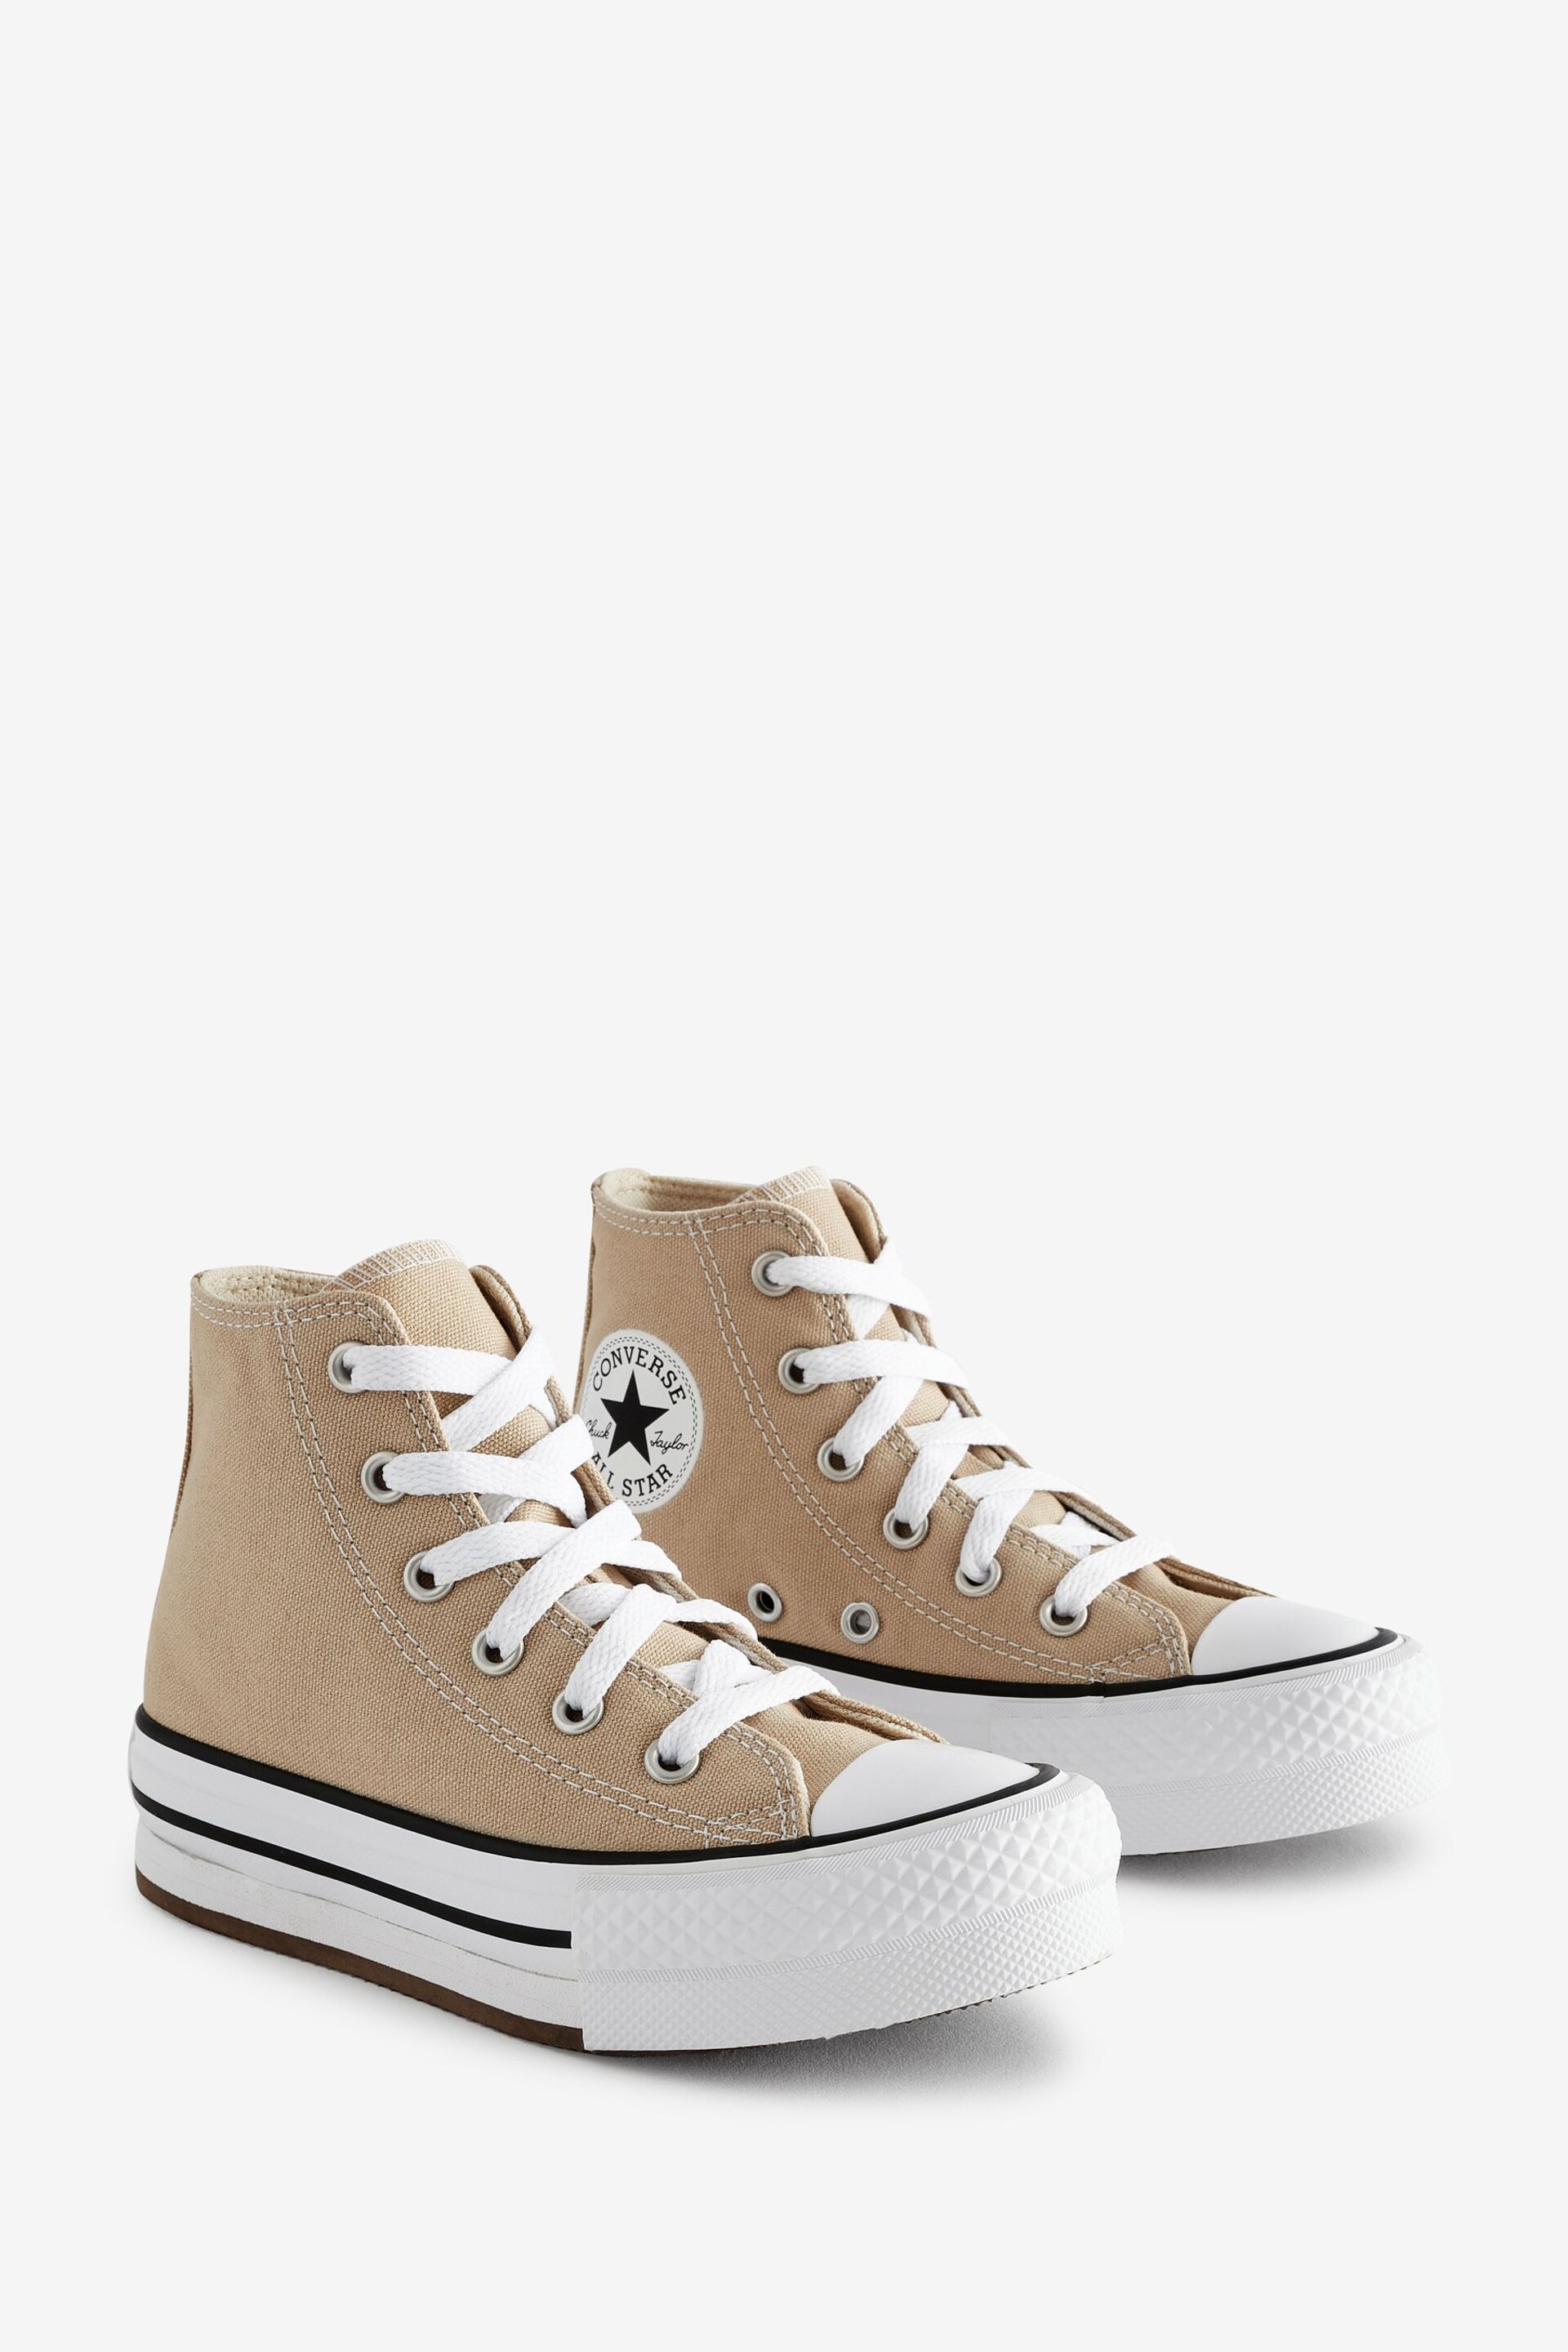 Converse Creame Neutral All Star EVA Lift Junior Trainers - Image 3 of 9